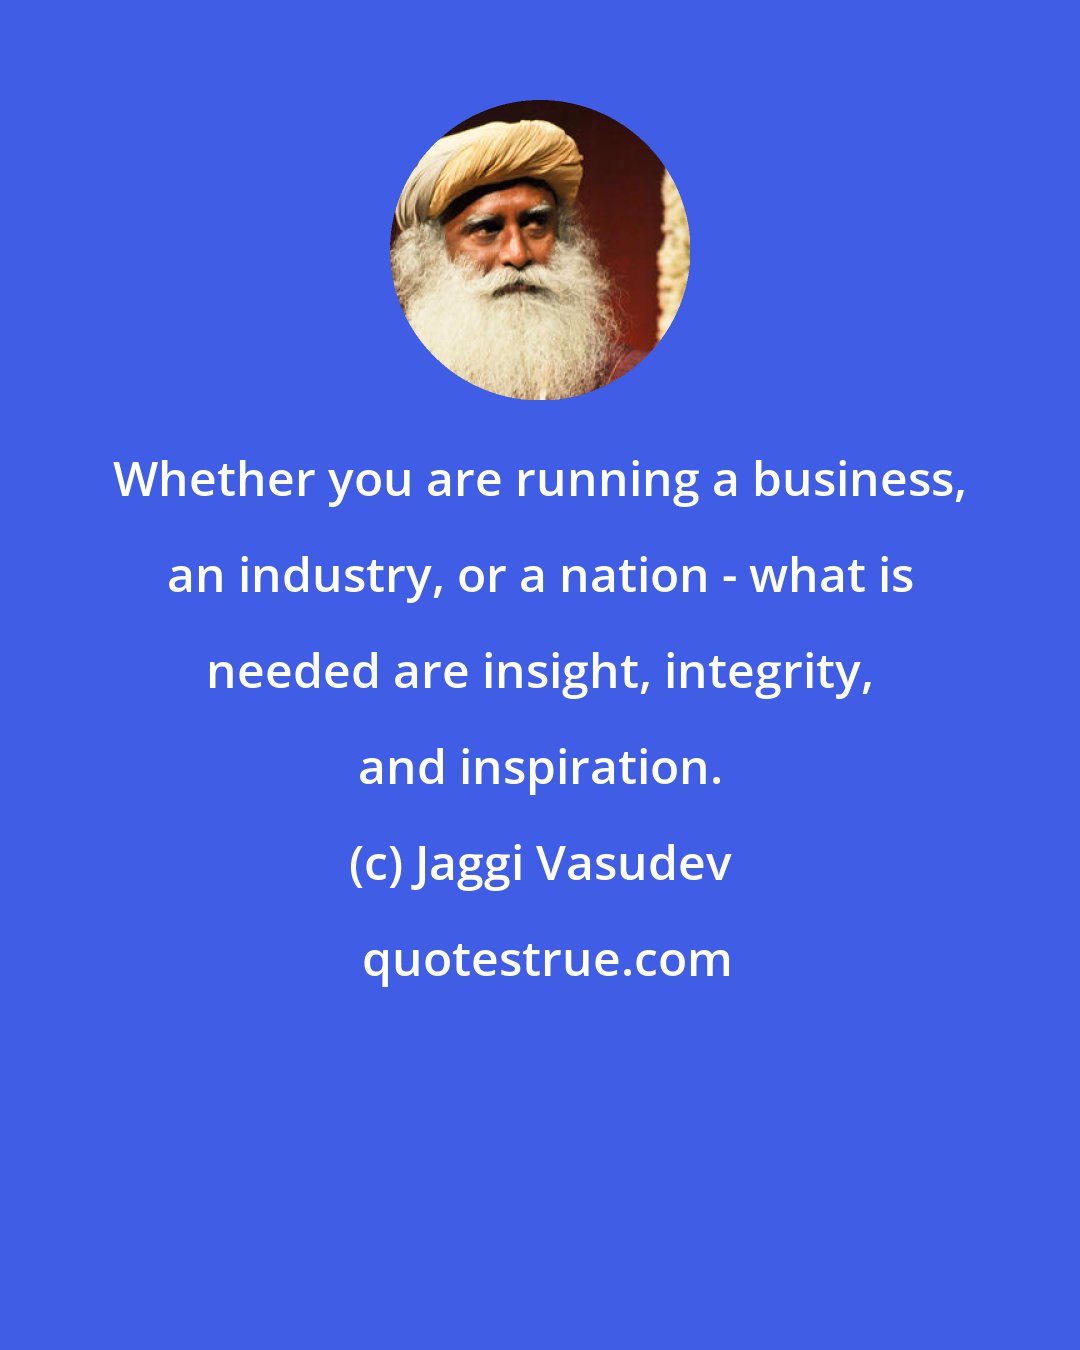 Jaggi Vasudev: Whether you are running a business, an industry, or a nation - what is needed are insight, integrity, and inspiration.